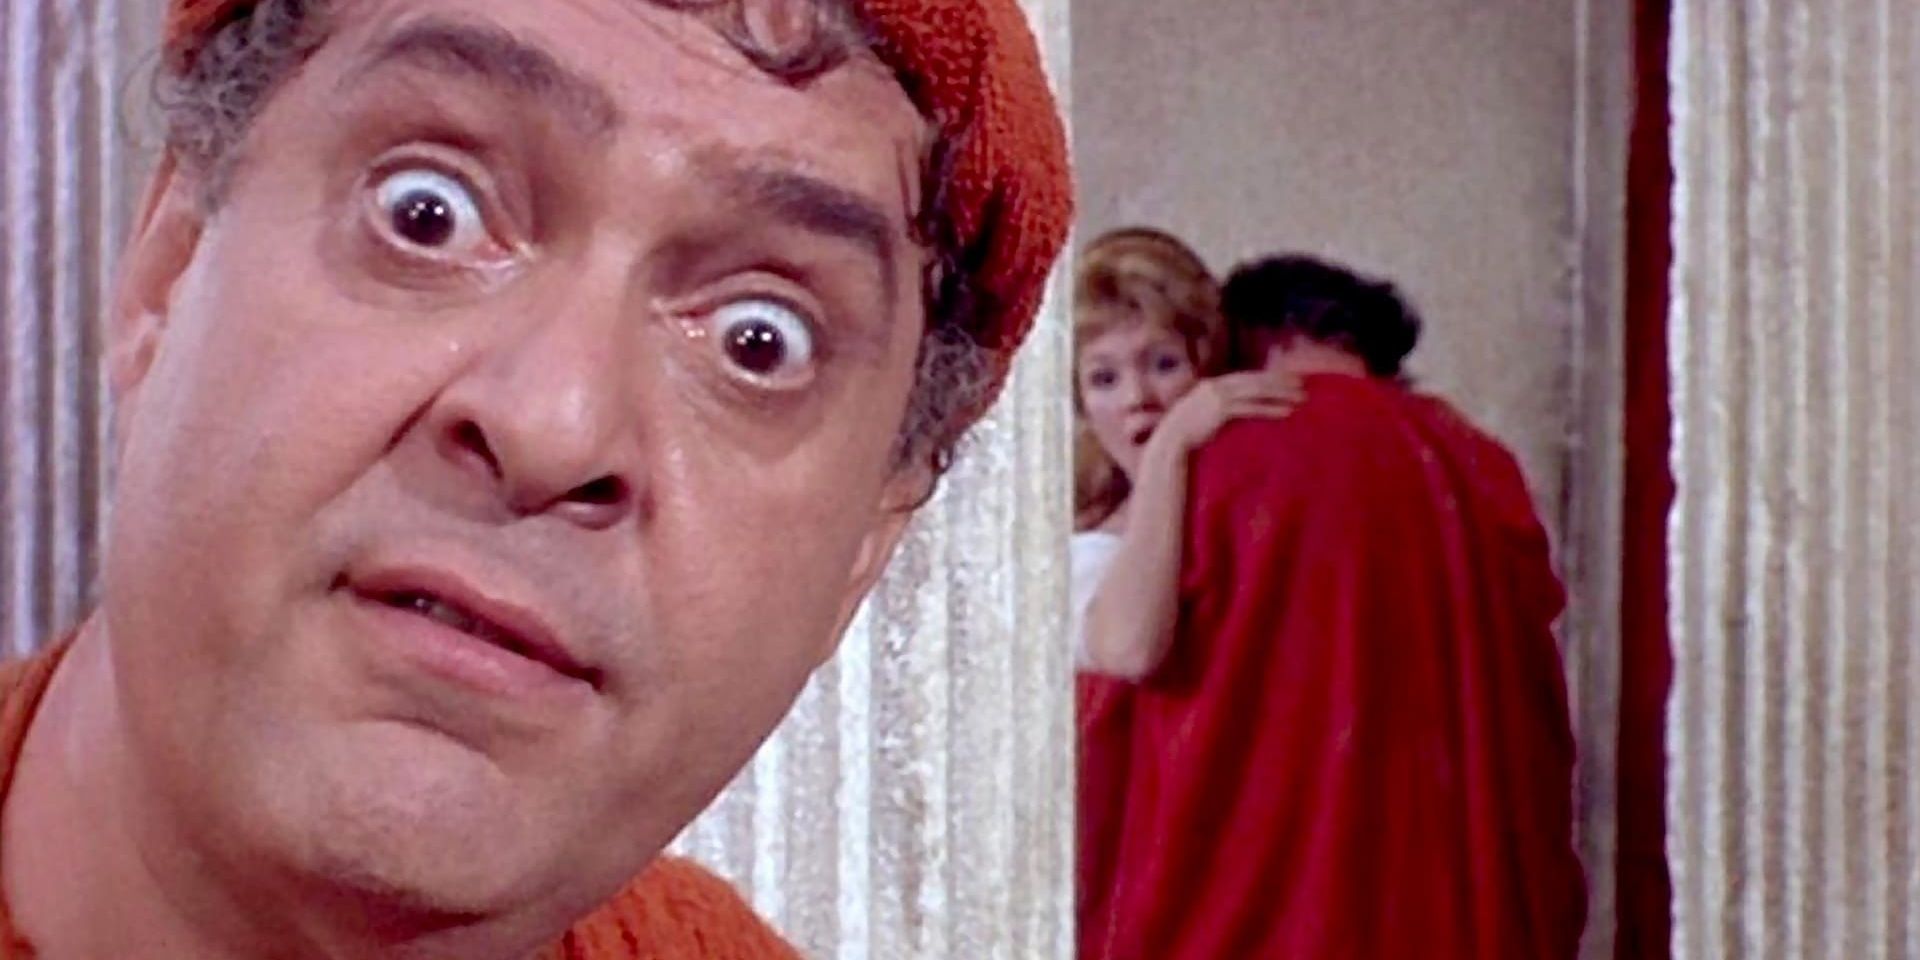 A character looking directly into the camera in A Funny Thing Happened On The Way To The Forum with two other characters embracing in the background